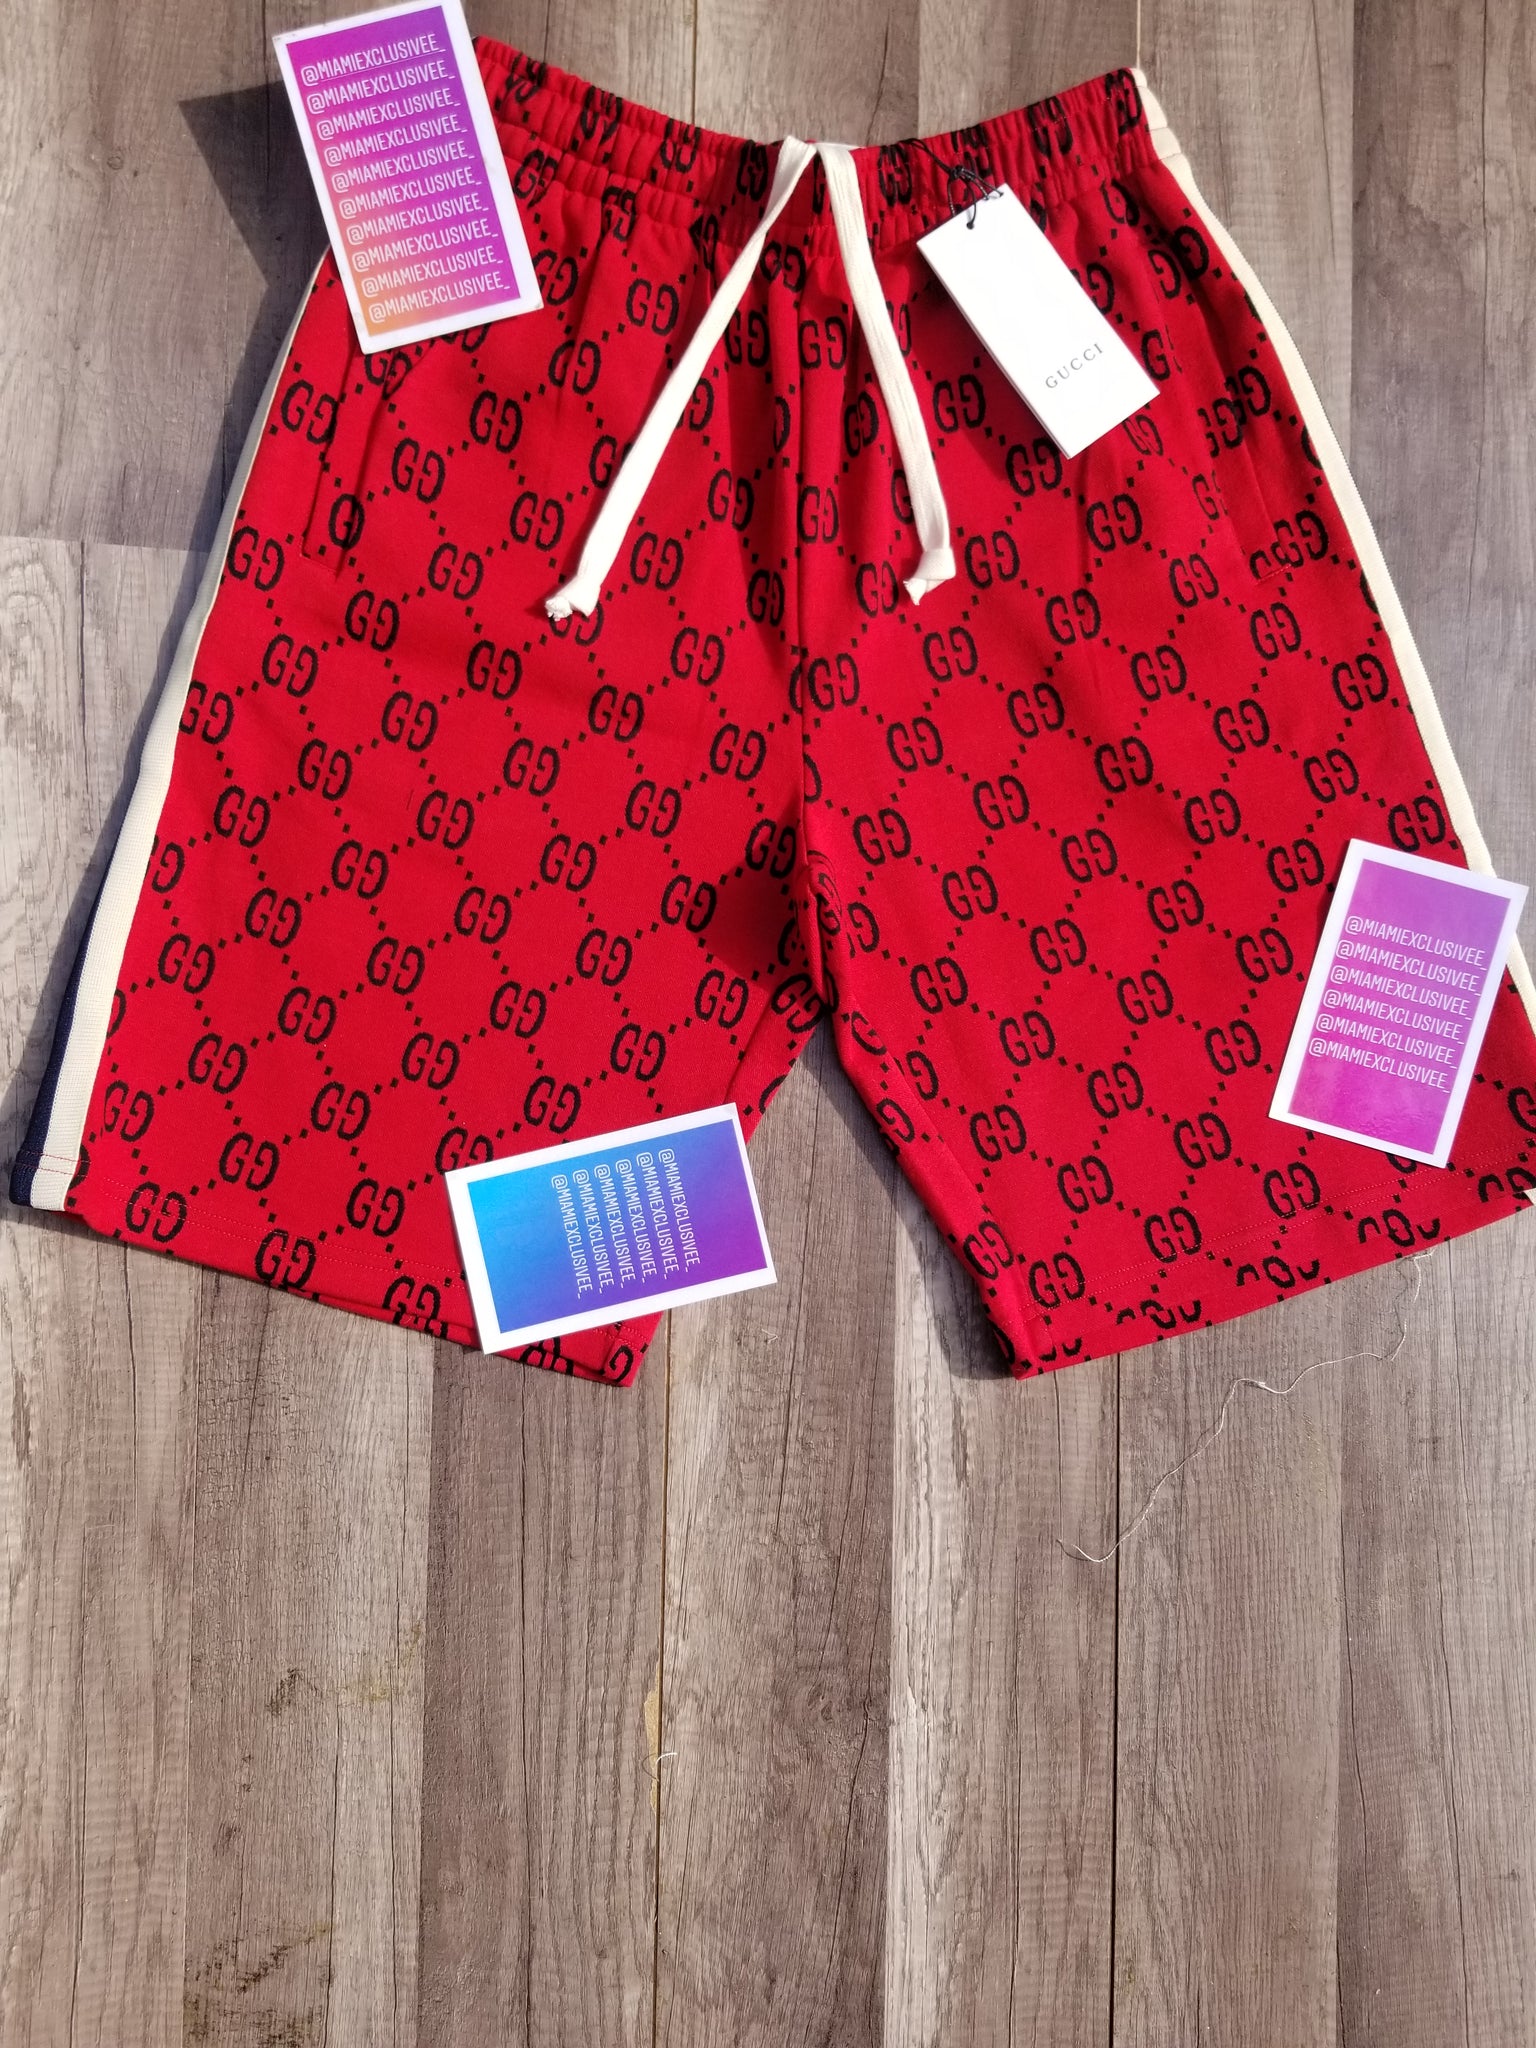 red gucci shorts